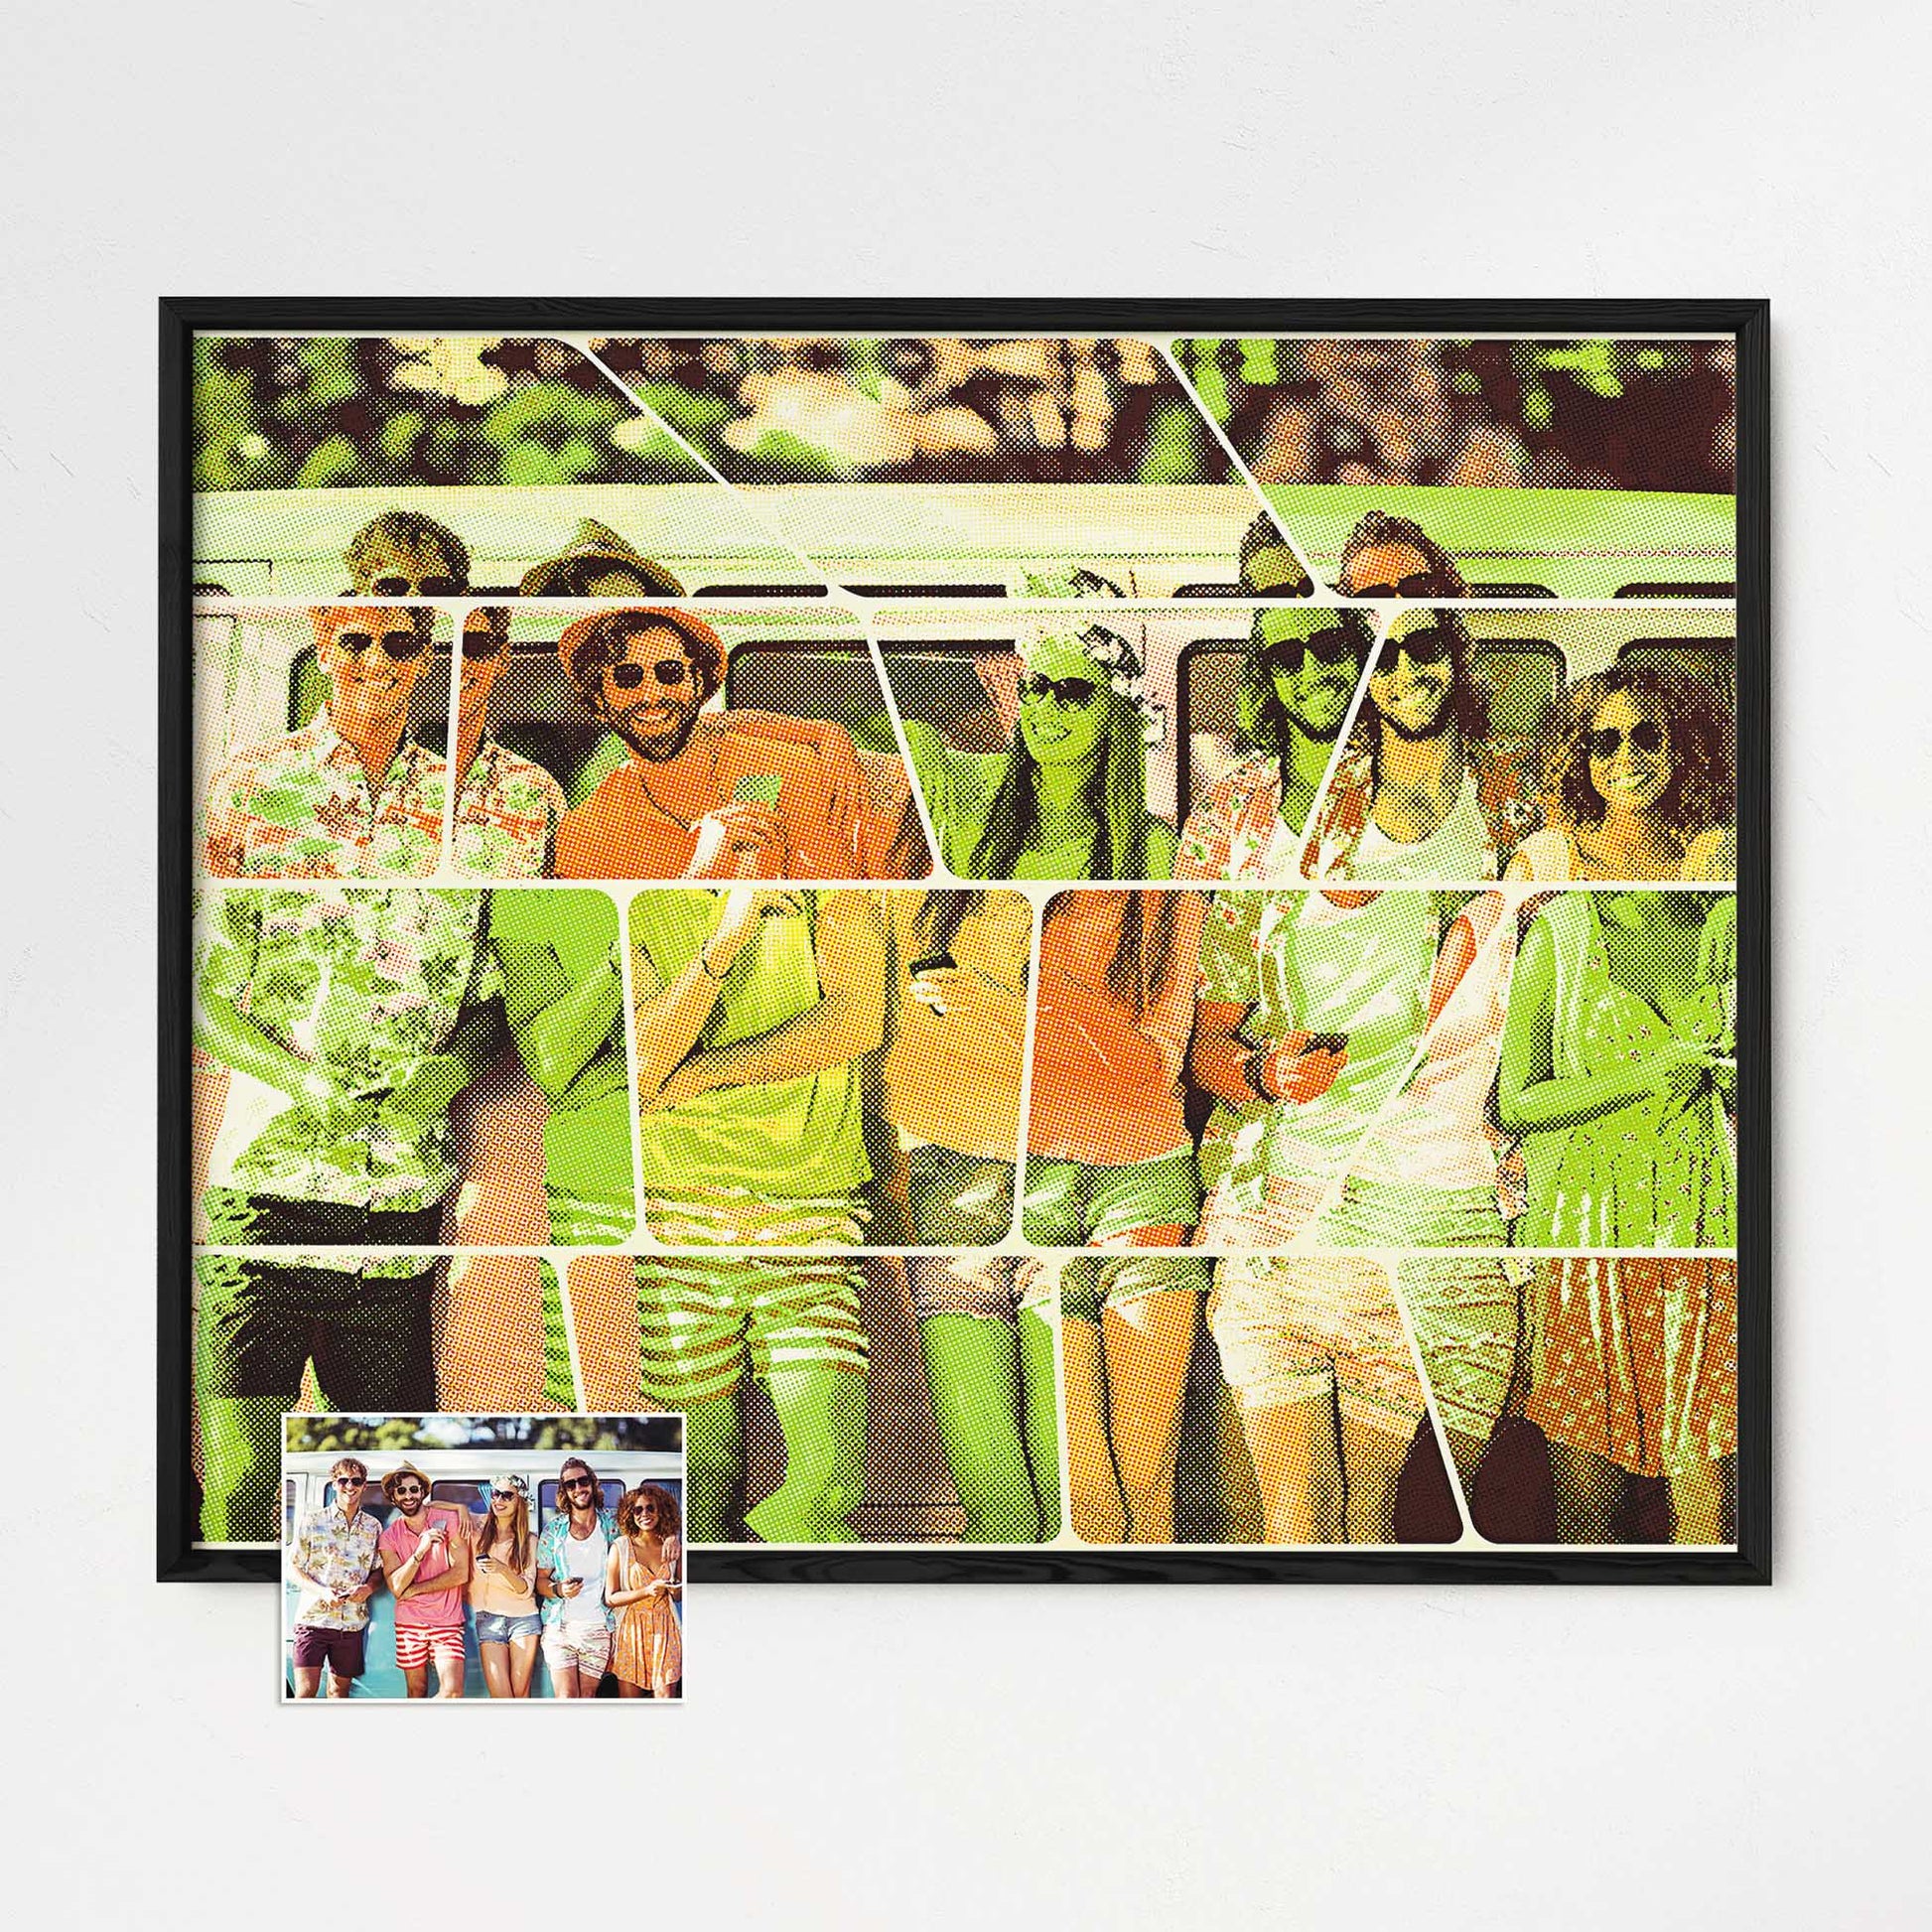 Transform your photo into a Personalised Vintage Comics Framed Print. The retro effect and old-school texture lend a nostalgic vibe to this full-color print. With vibrant green and orange hues, it ignites imagination and evokes a creative spirit